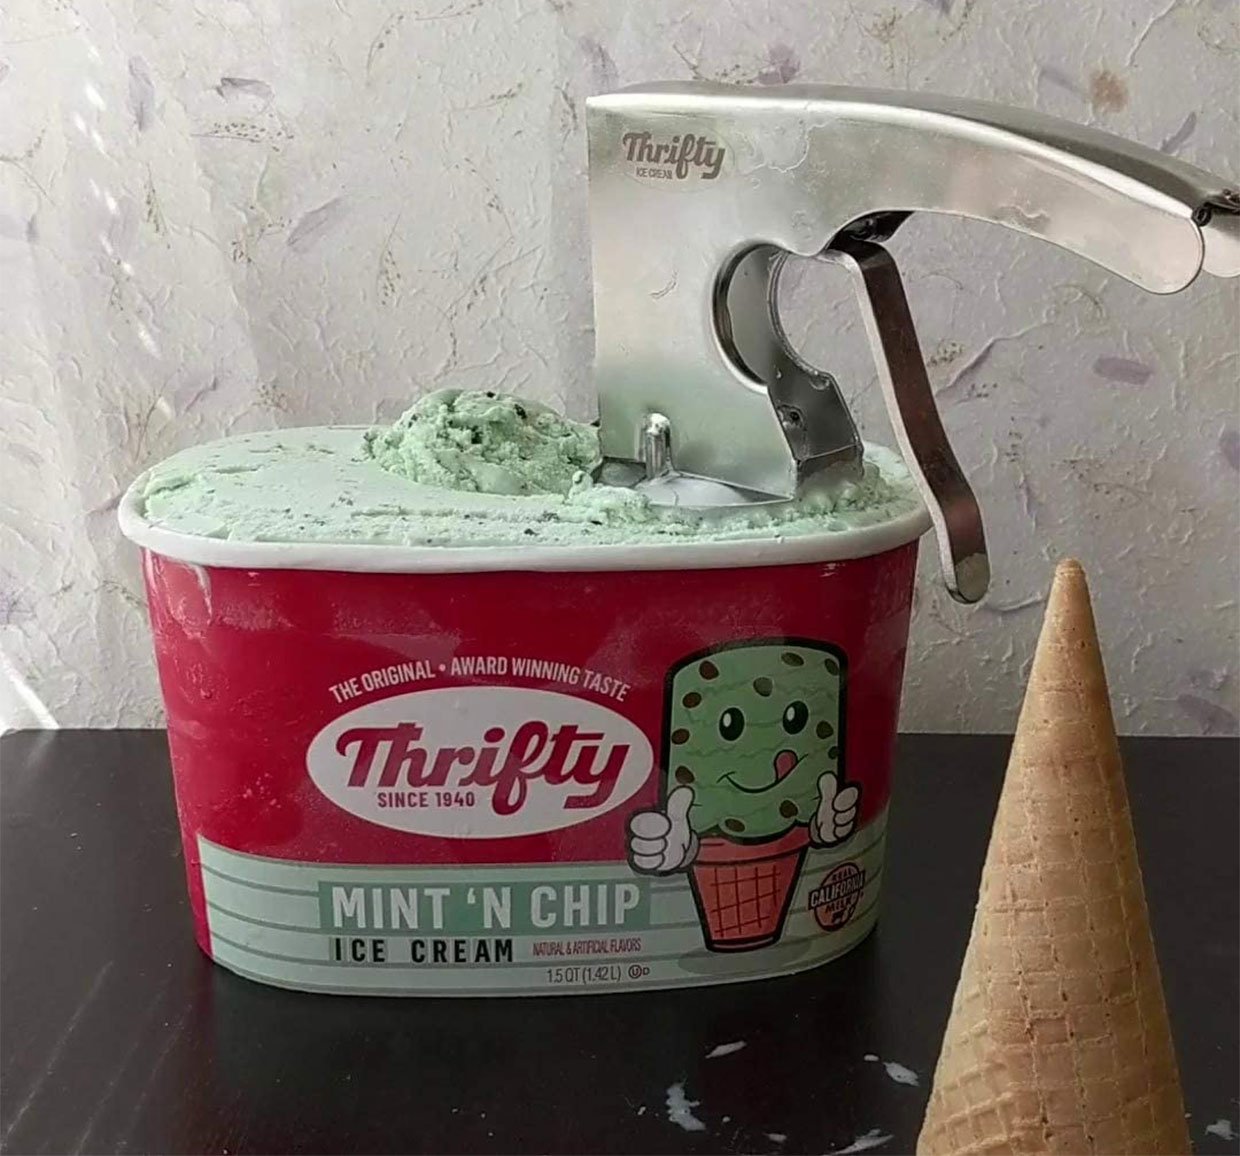 Thrifty Old Time Ice Cream Scoop